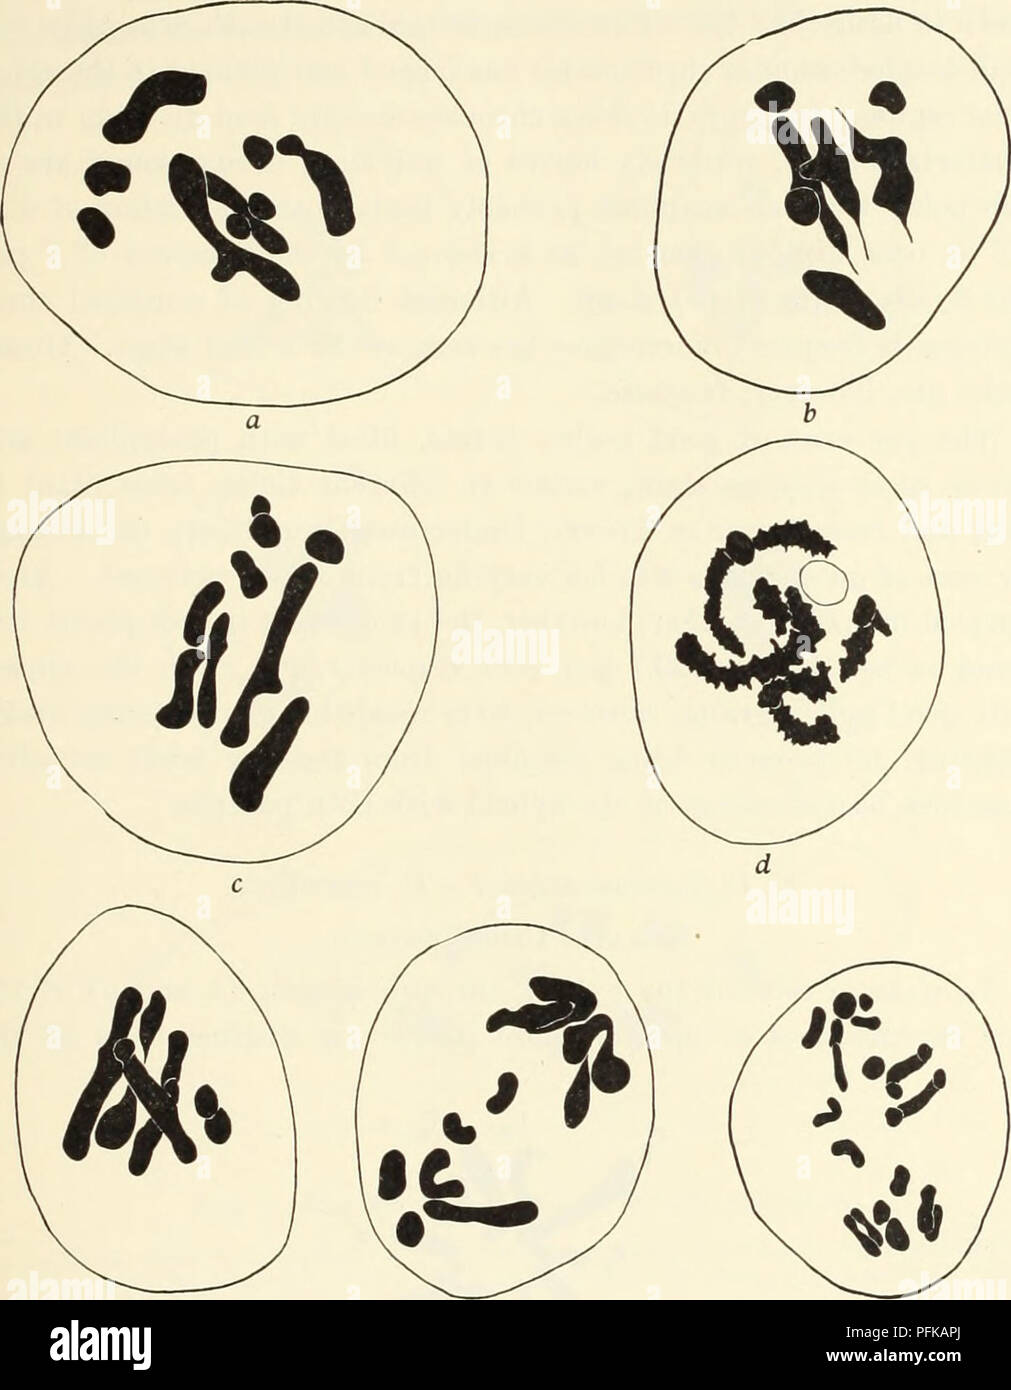 . Cytological studies of five interspecific hybrids of Crepis leontodontoides. Karyokinesis; Crepis. 1930] Avery: Hybrids of Crep.is leontodontoides 143. * f g Fig. 5. Meiosis in F1 C. leontodontoides-tectorum. a, I-M, with two bivalents and five univalents; o, I-M, with three bivalents, and three univalents; c, I—M, with one bivalent, one loose pair, and five univalents; d, early diakinesis and e, I-M, with four bivalents and one univalent chromosome; /, and g, late I-A.. Please note that these images are extracted from scanned page images that may have been digitally enhanced for readability Stock Photo